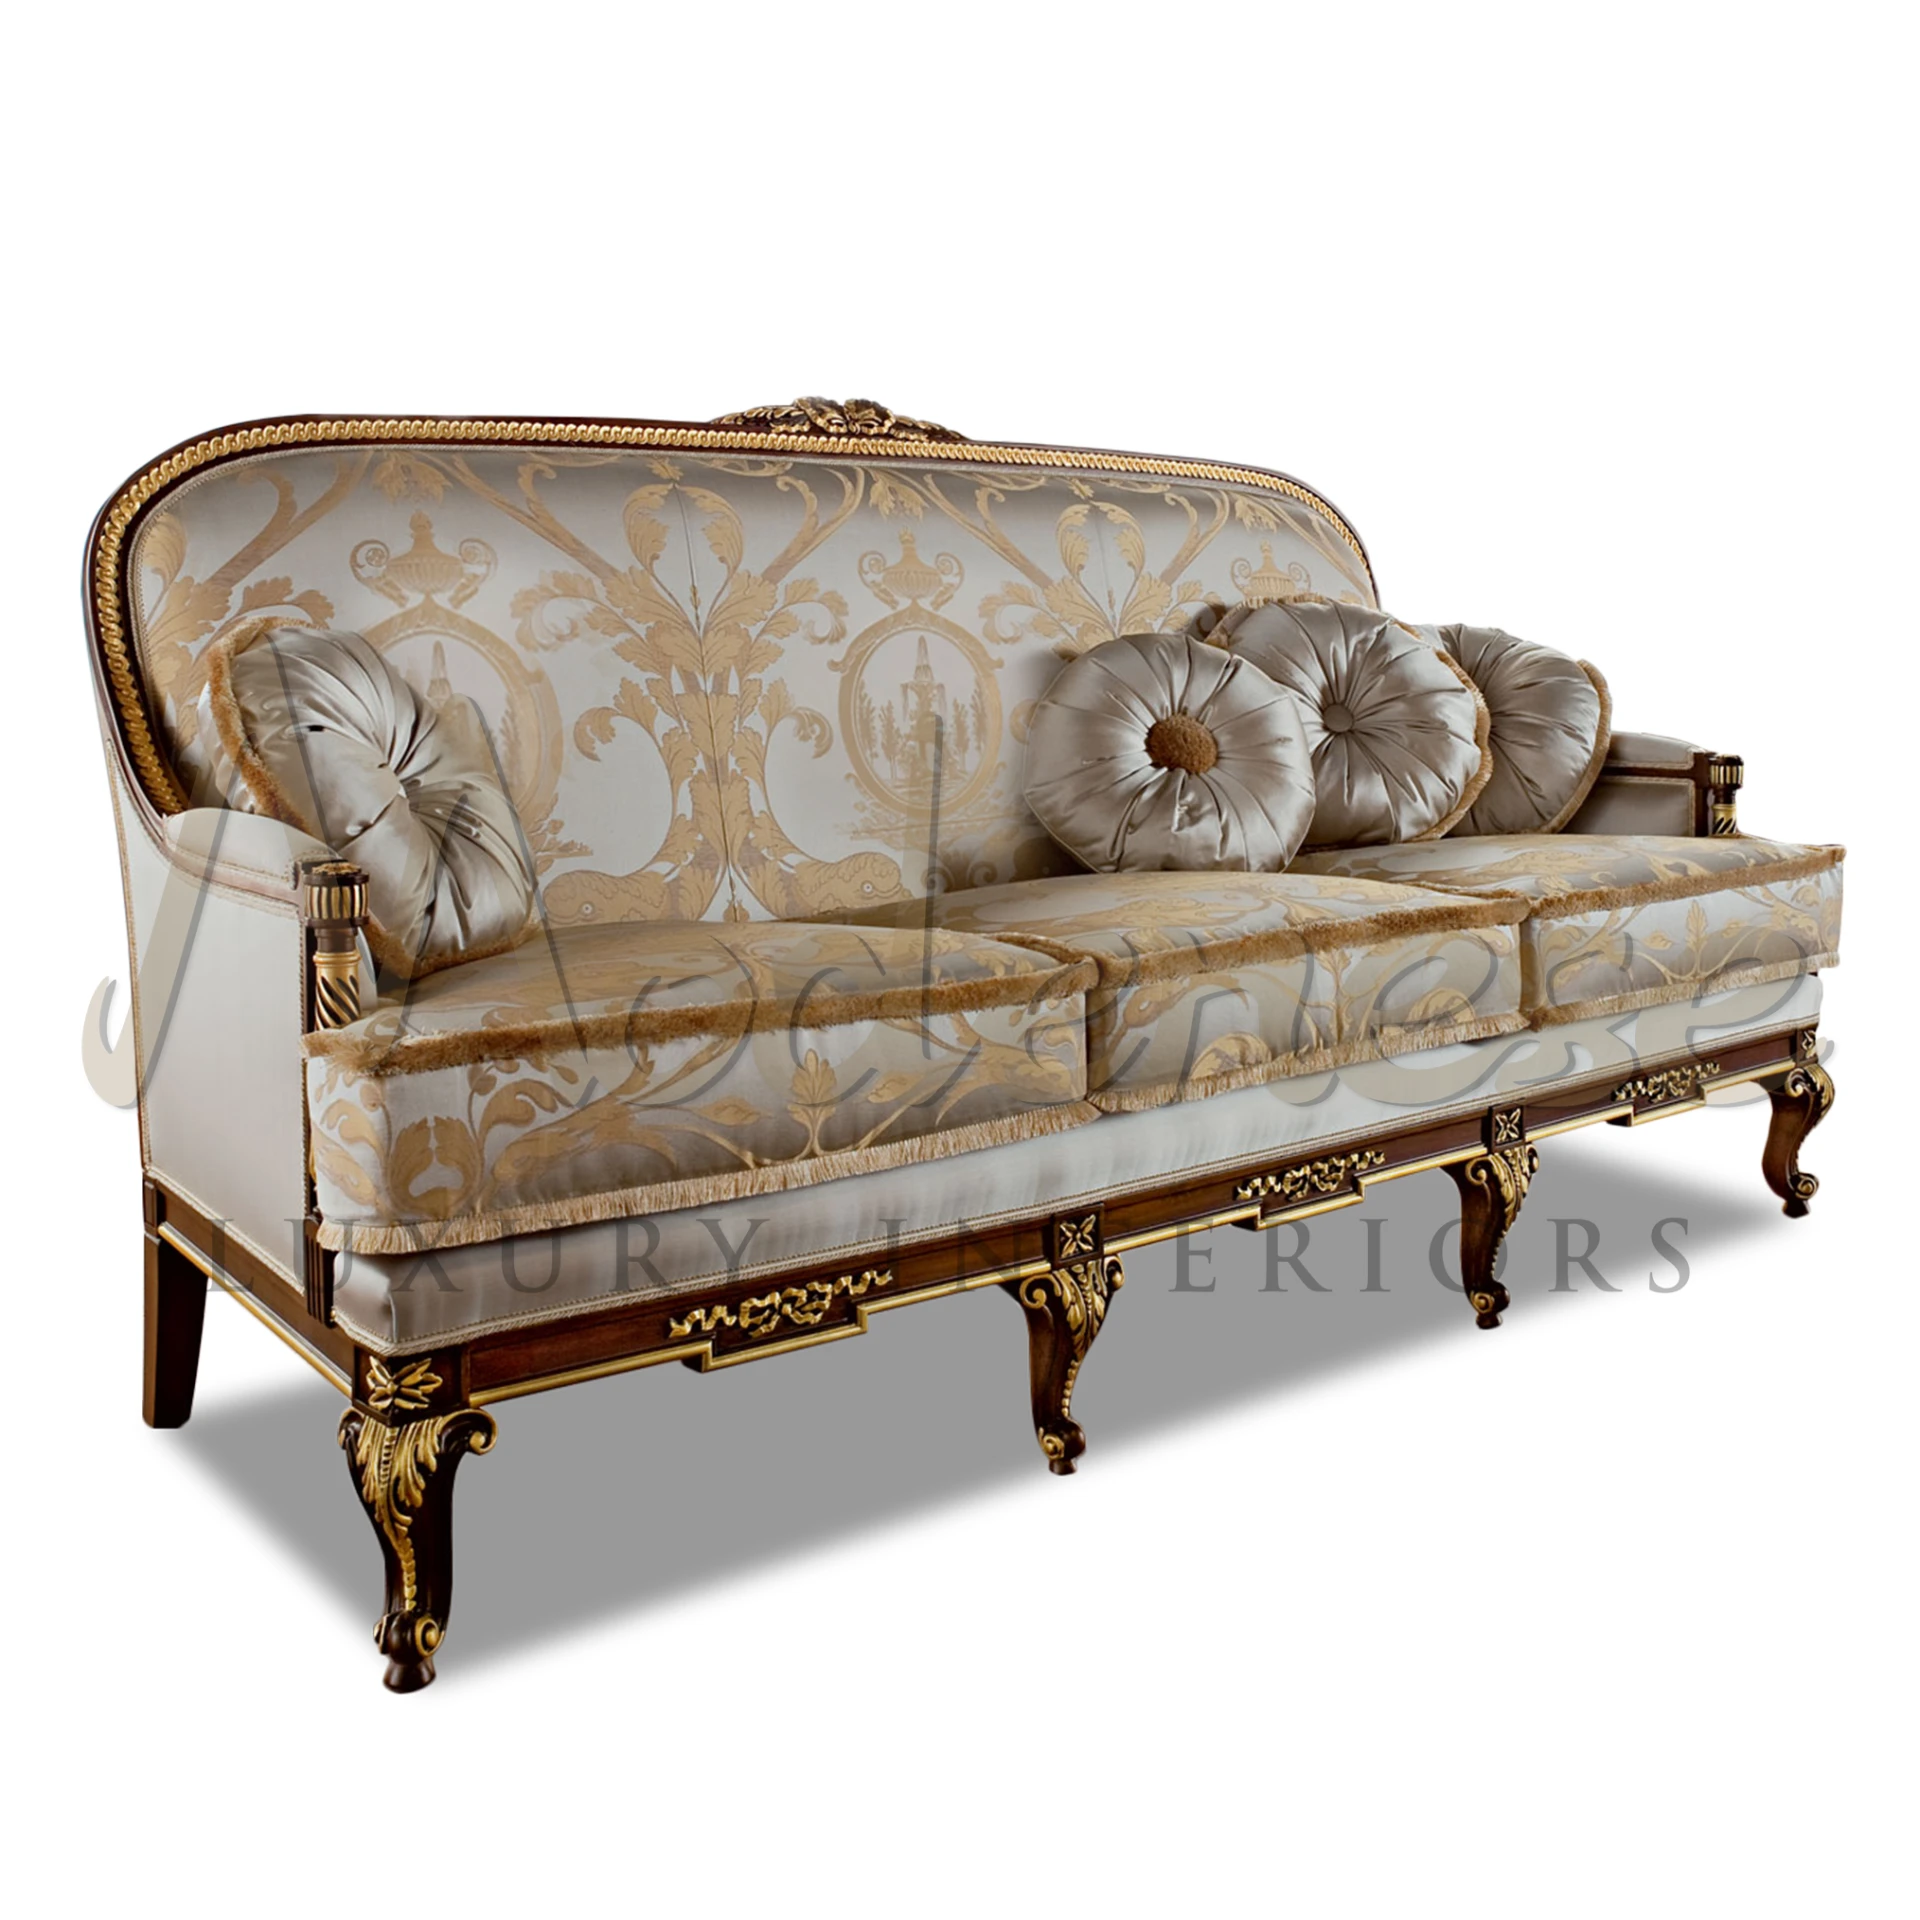  Elegant Classic Style Sofa with richly carved solid wood frame, embodying timeless craftsmanship and baroque design.
